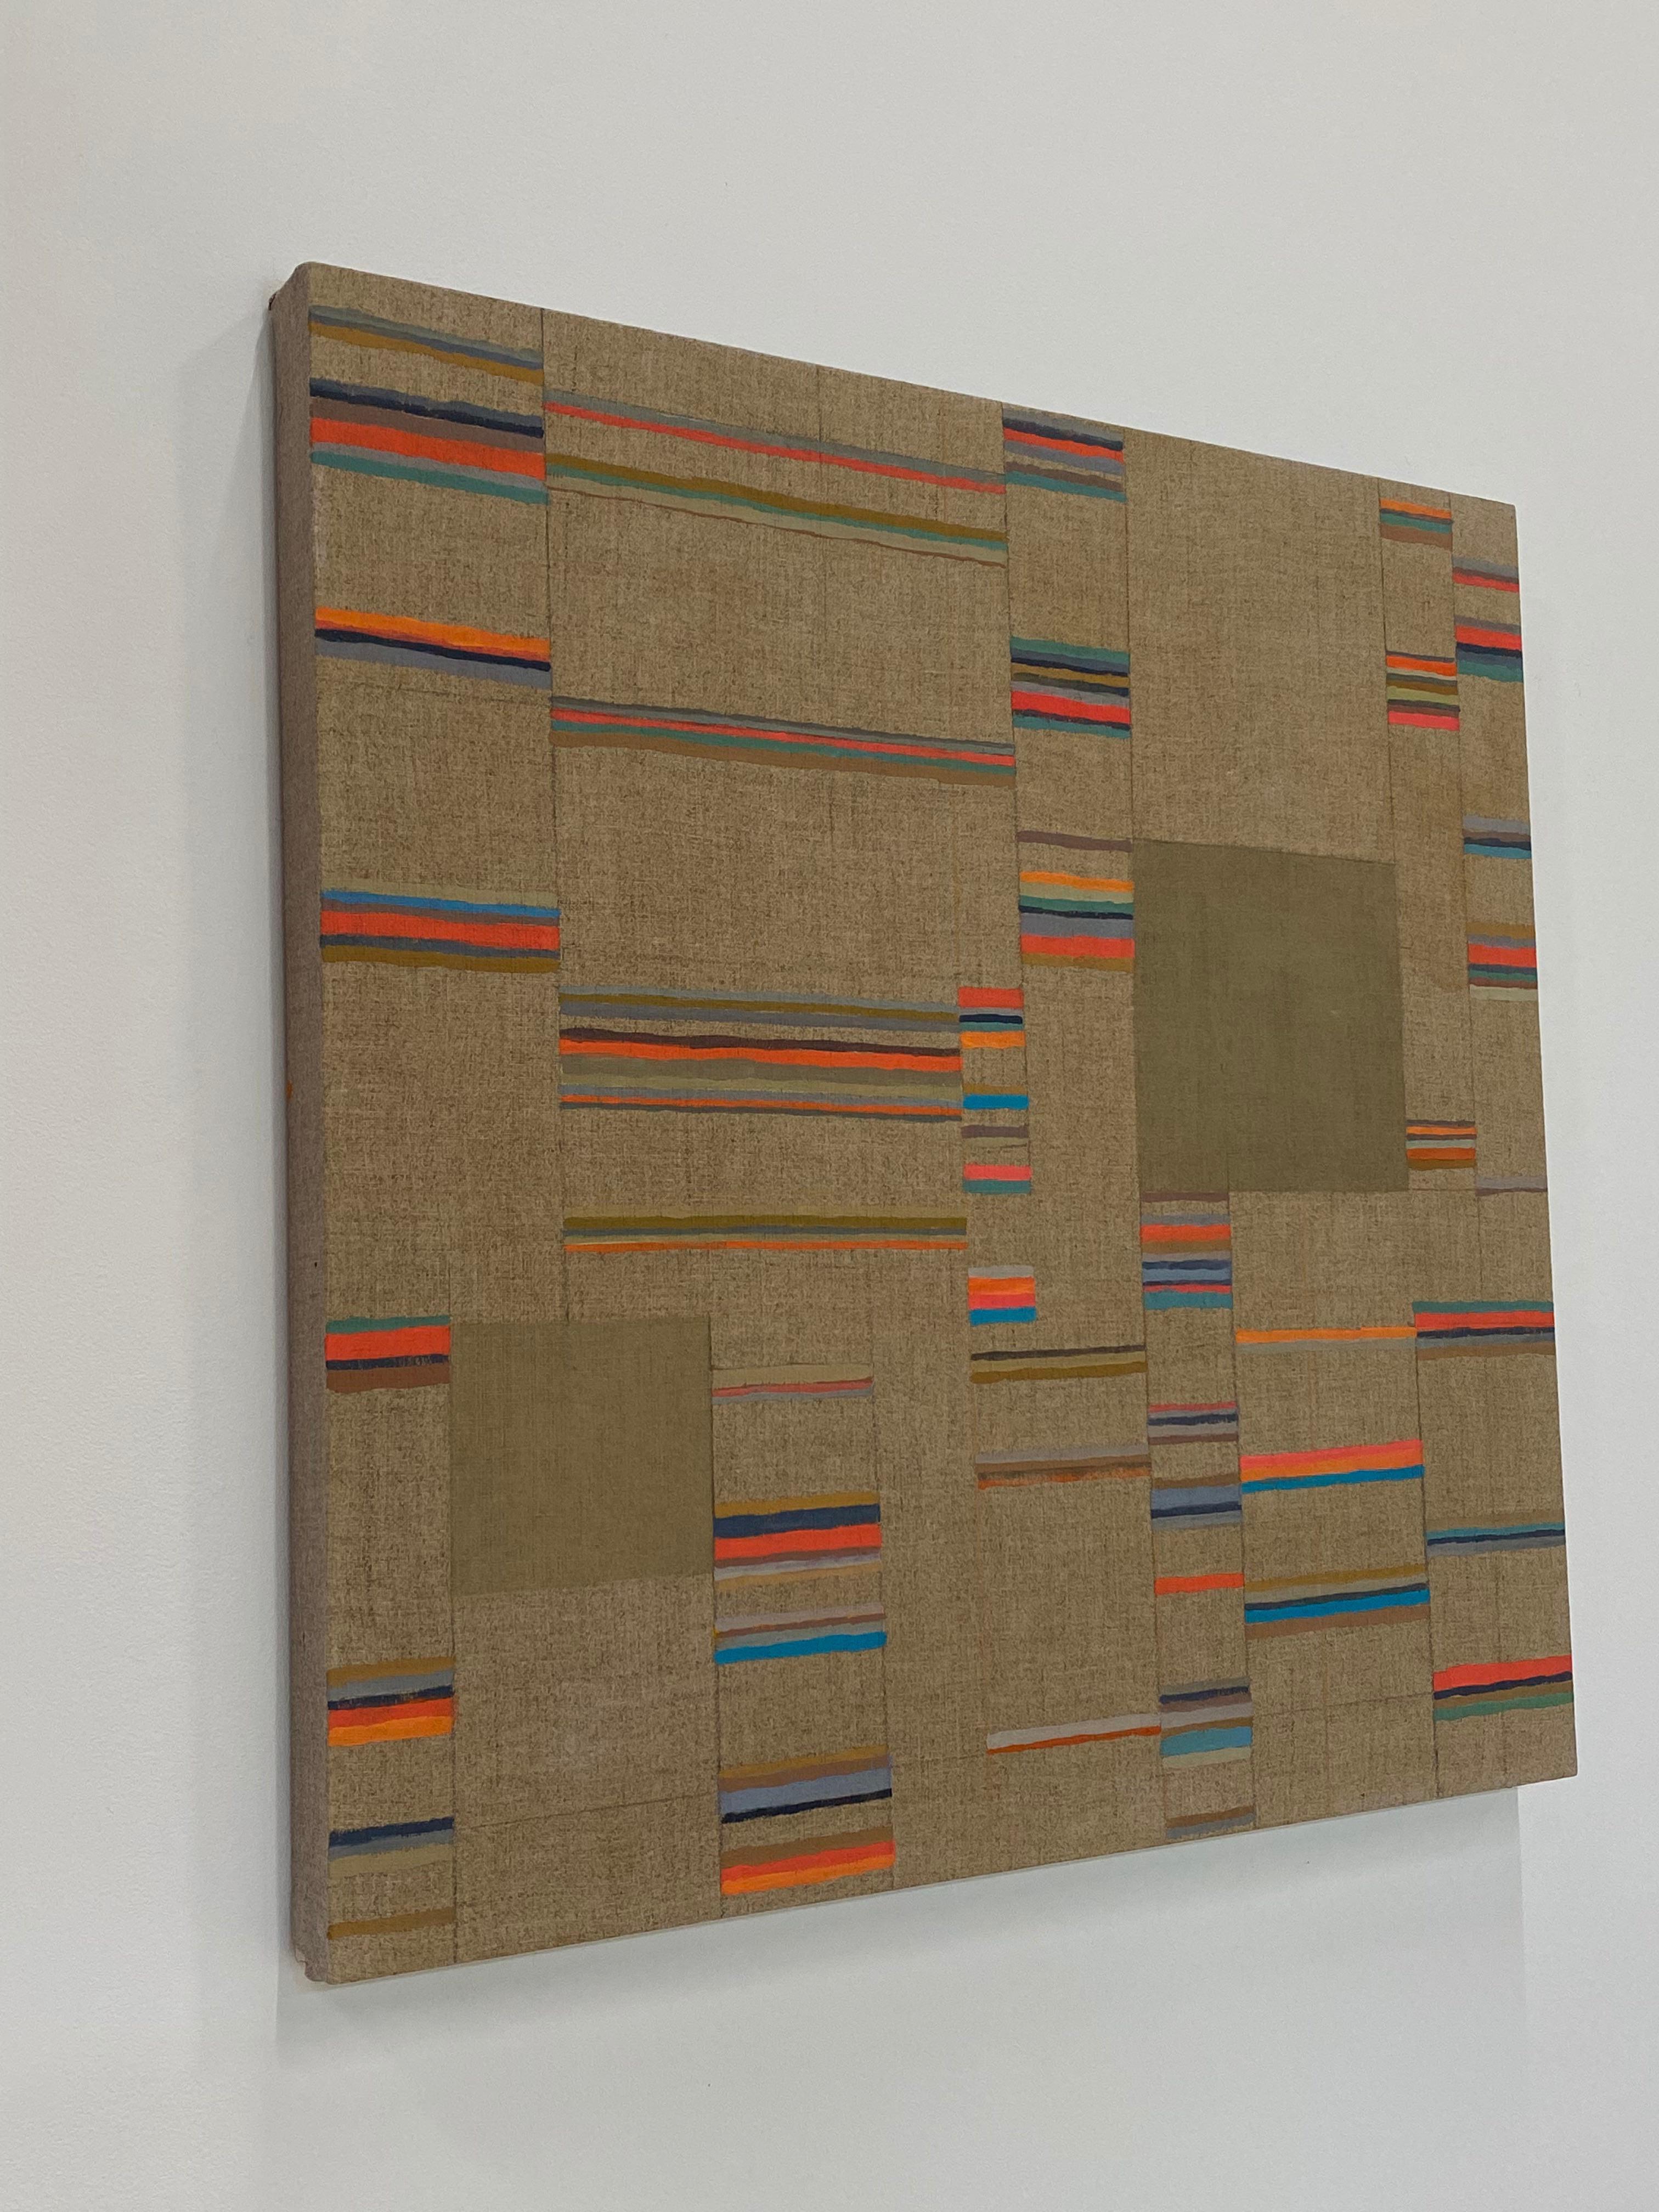 Carefully ordered stripes in shades of luminous peachy coral, olive brown, teal blue, ochre, apricot and blue are vibrant against a warm, earthy brown linen surface. Signed, dated and titled on verso.

Elizabeth Gourlay’s work is a meditation on